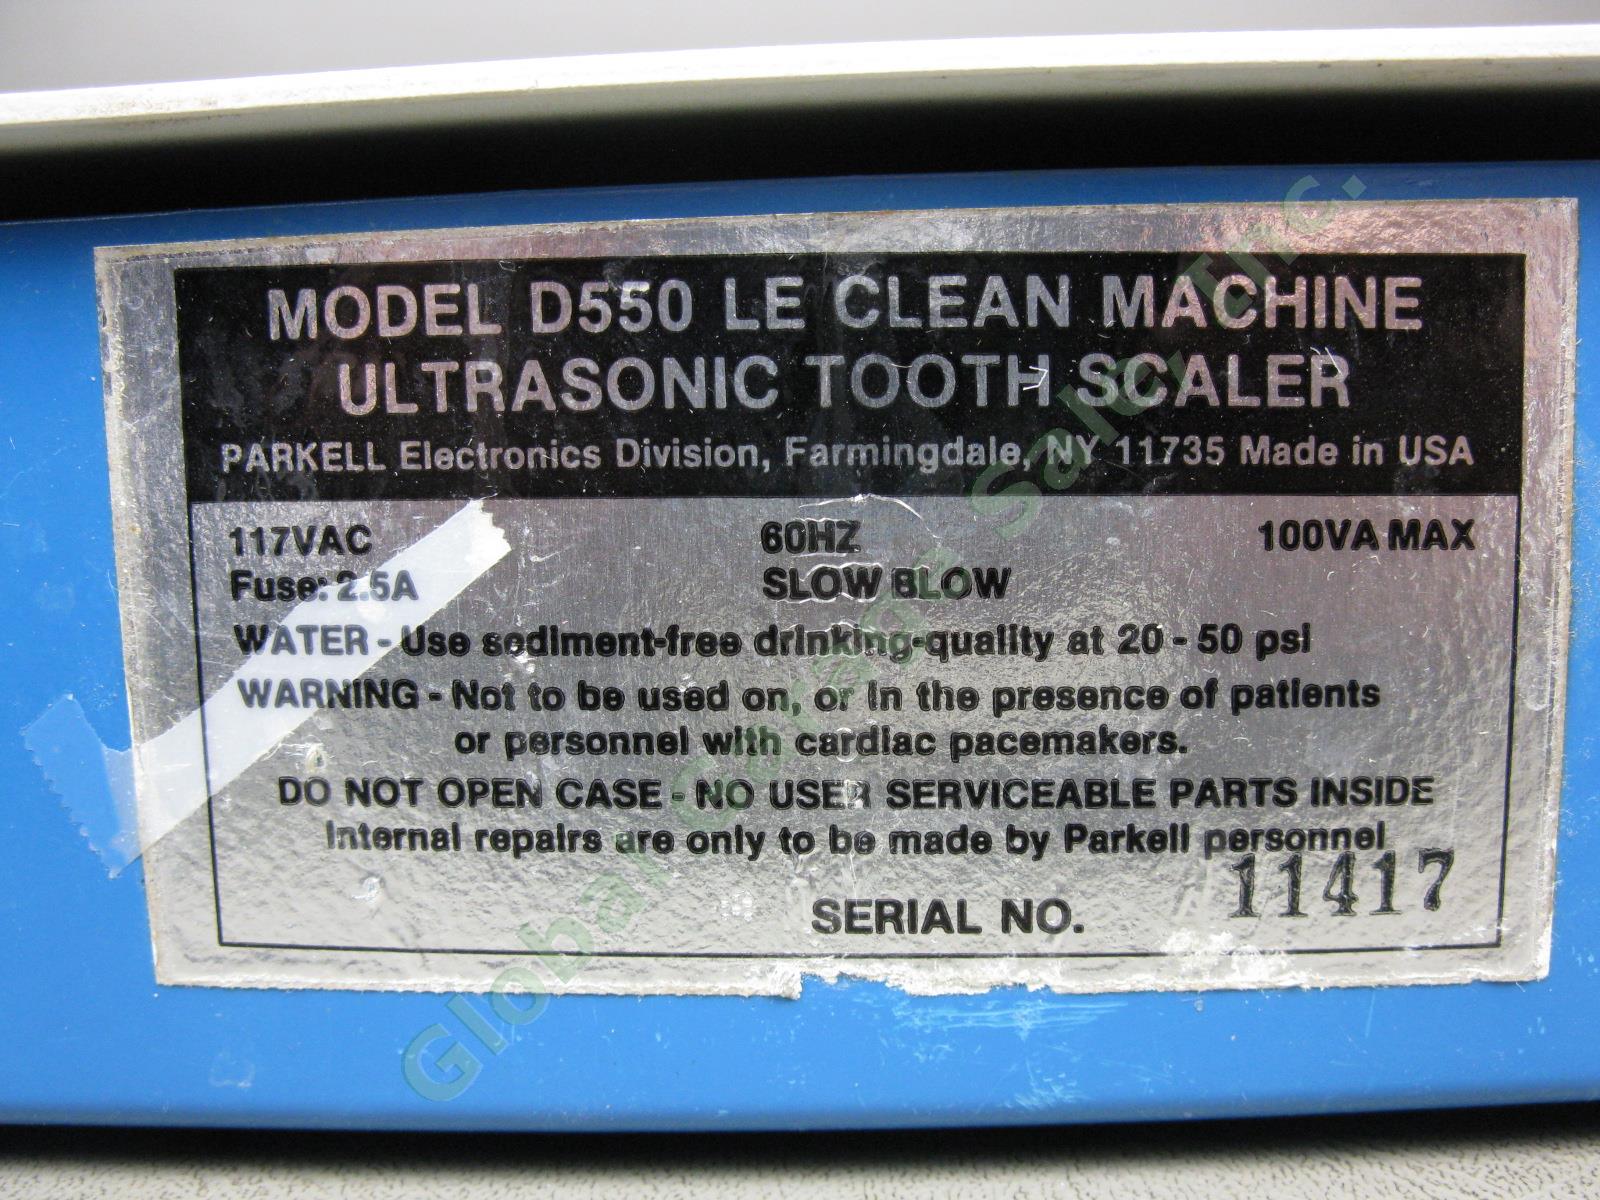 Parkell Le Clean Machine D550 Auto-Tuned Ultrasonic Dental Prophy Tooth Scaler 6